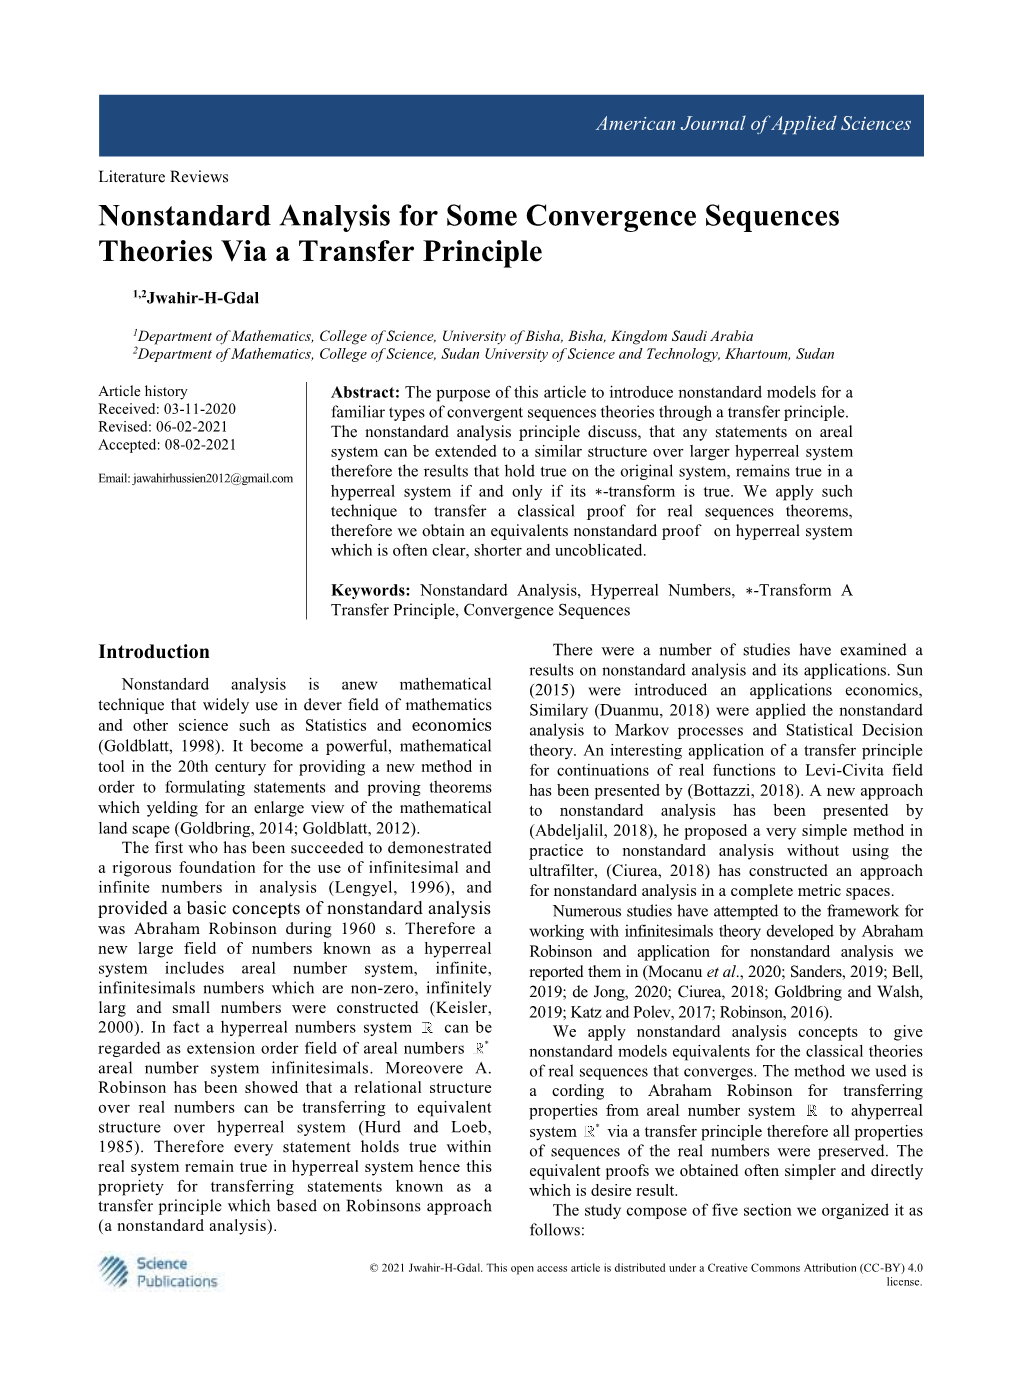 Nonstandard Analysis for Some Convergence Sequences Theories Via a Transfer Principle